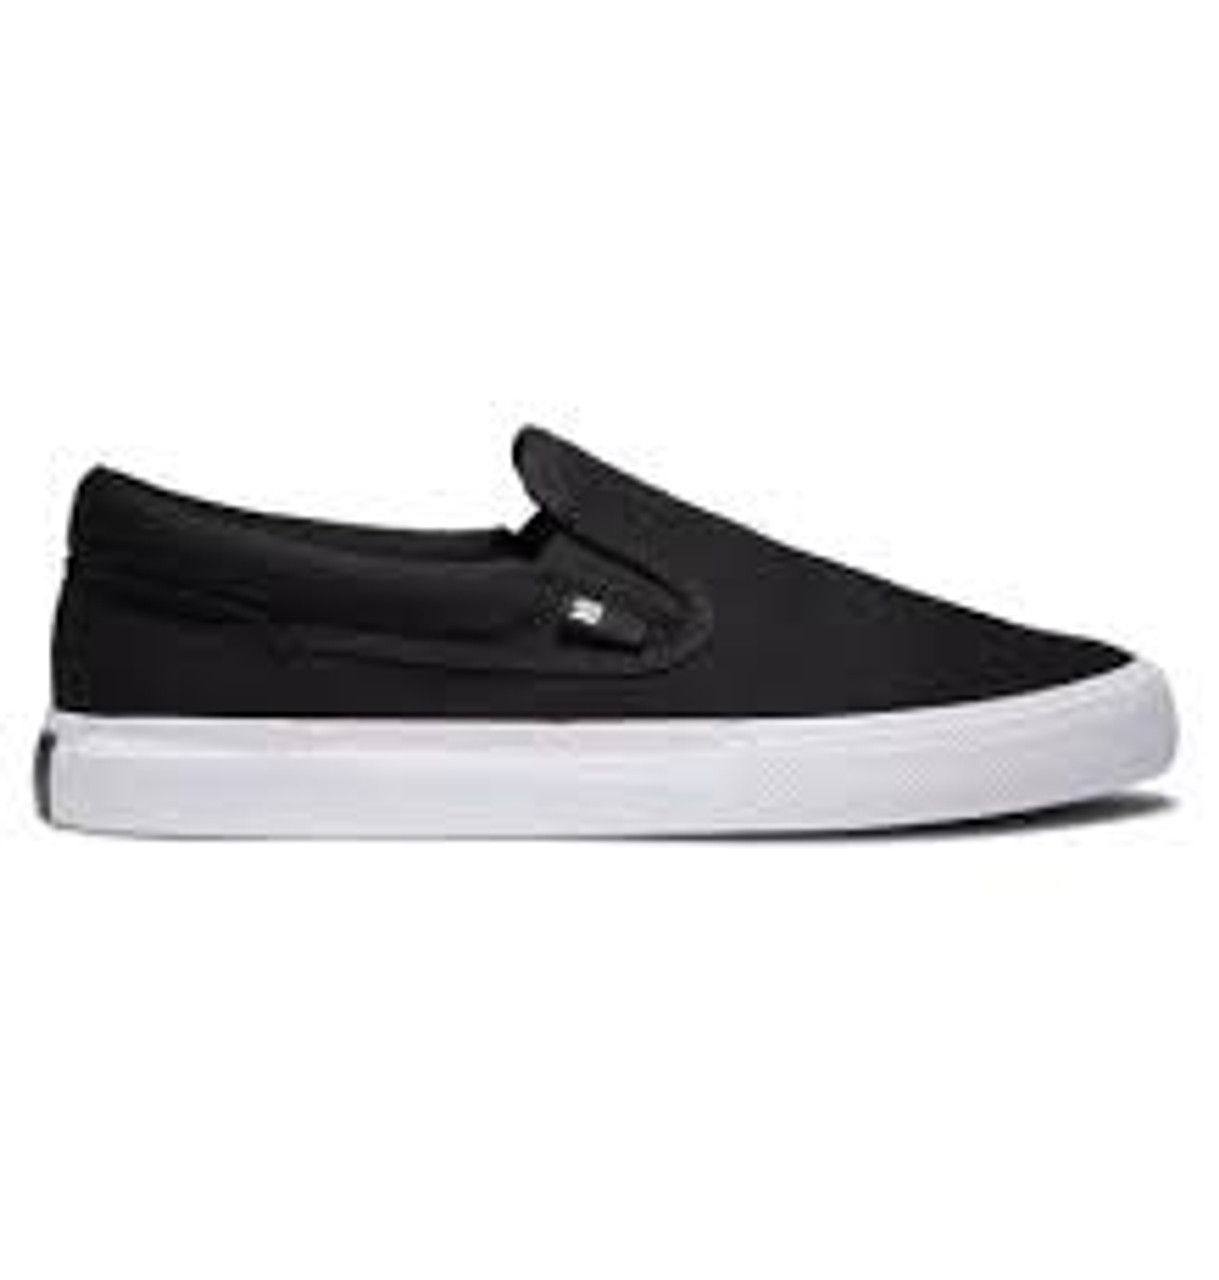 DC Shoes - Manual Slip-On - Black/White - Surf and Dirt